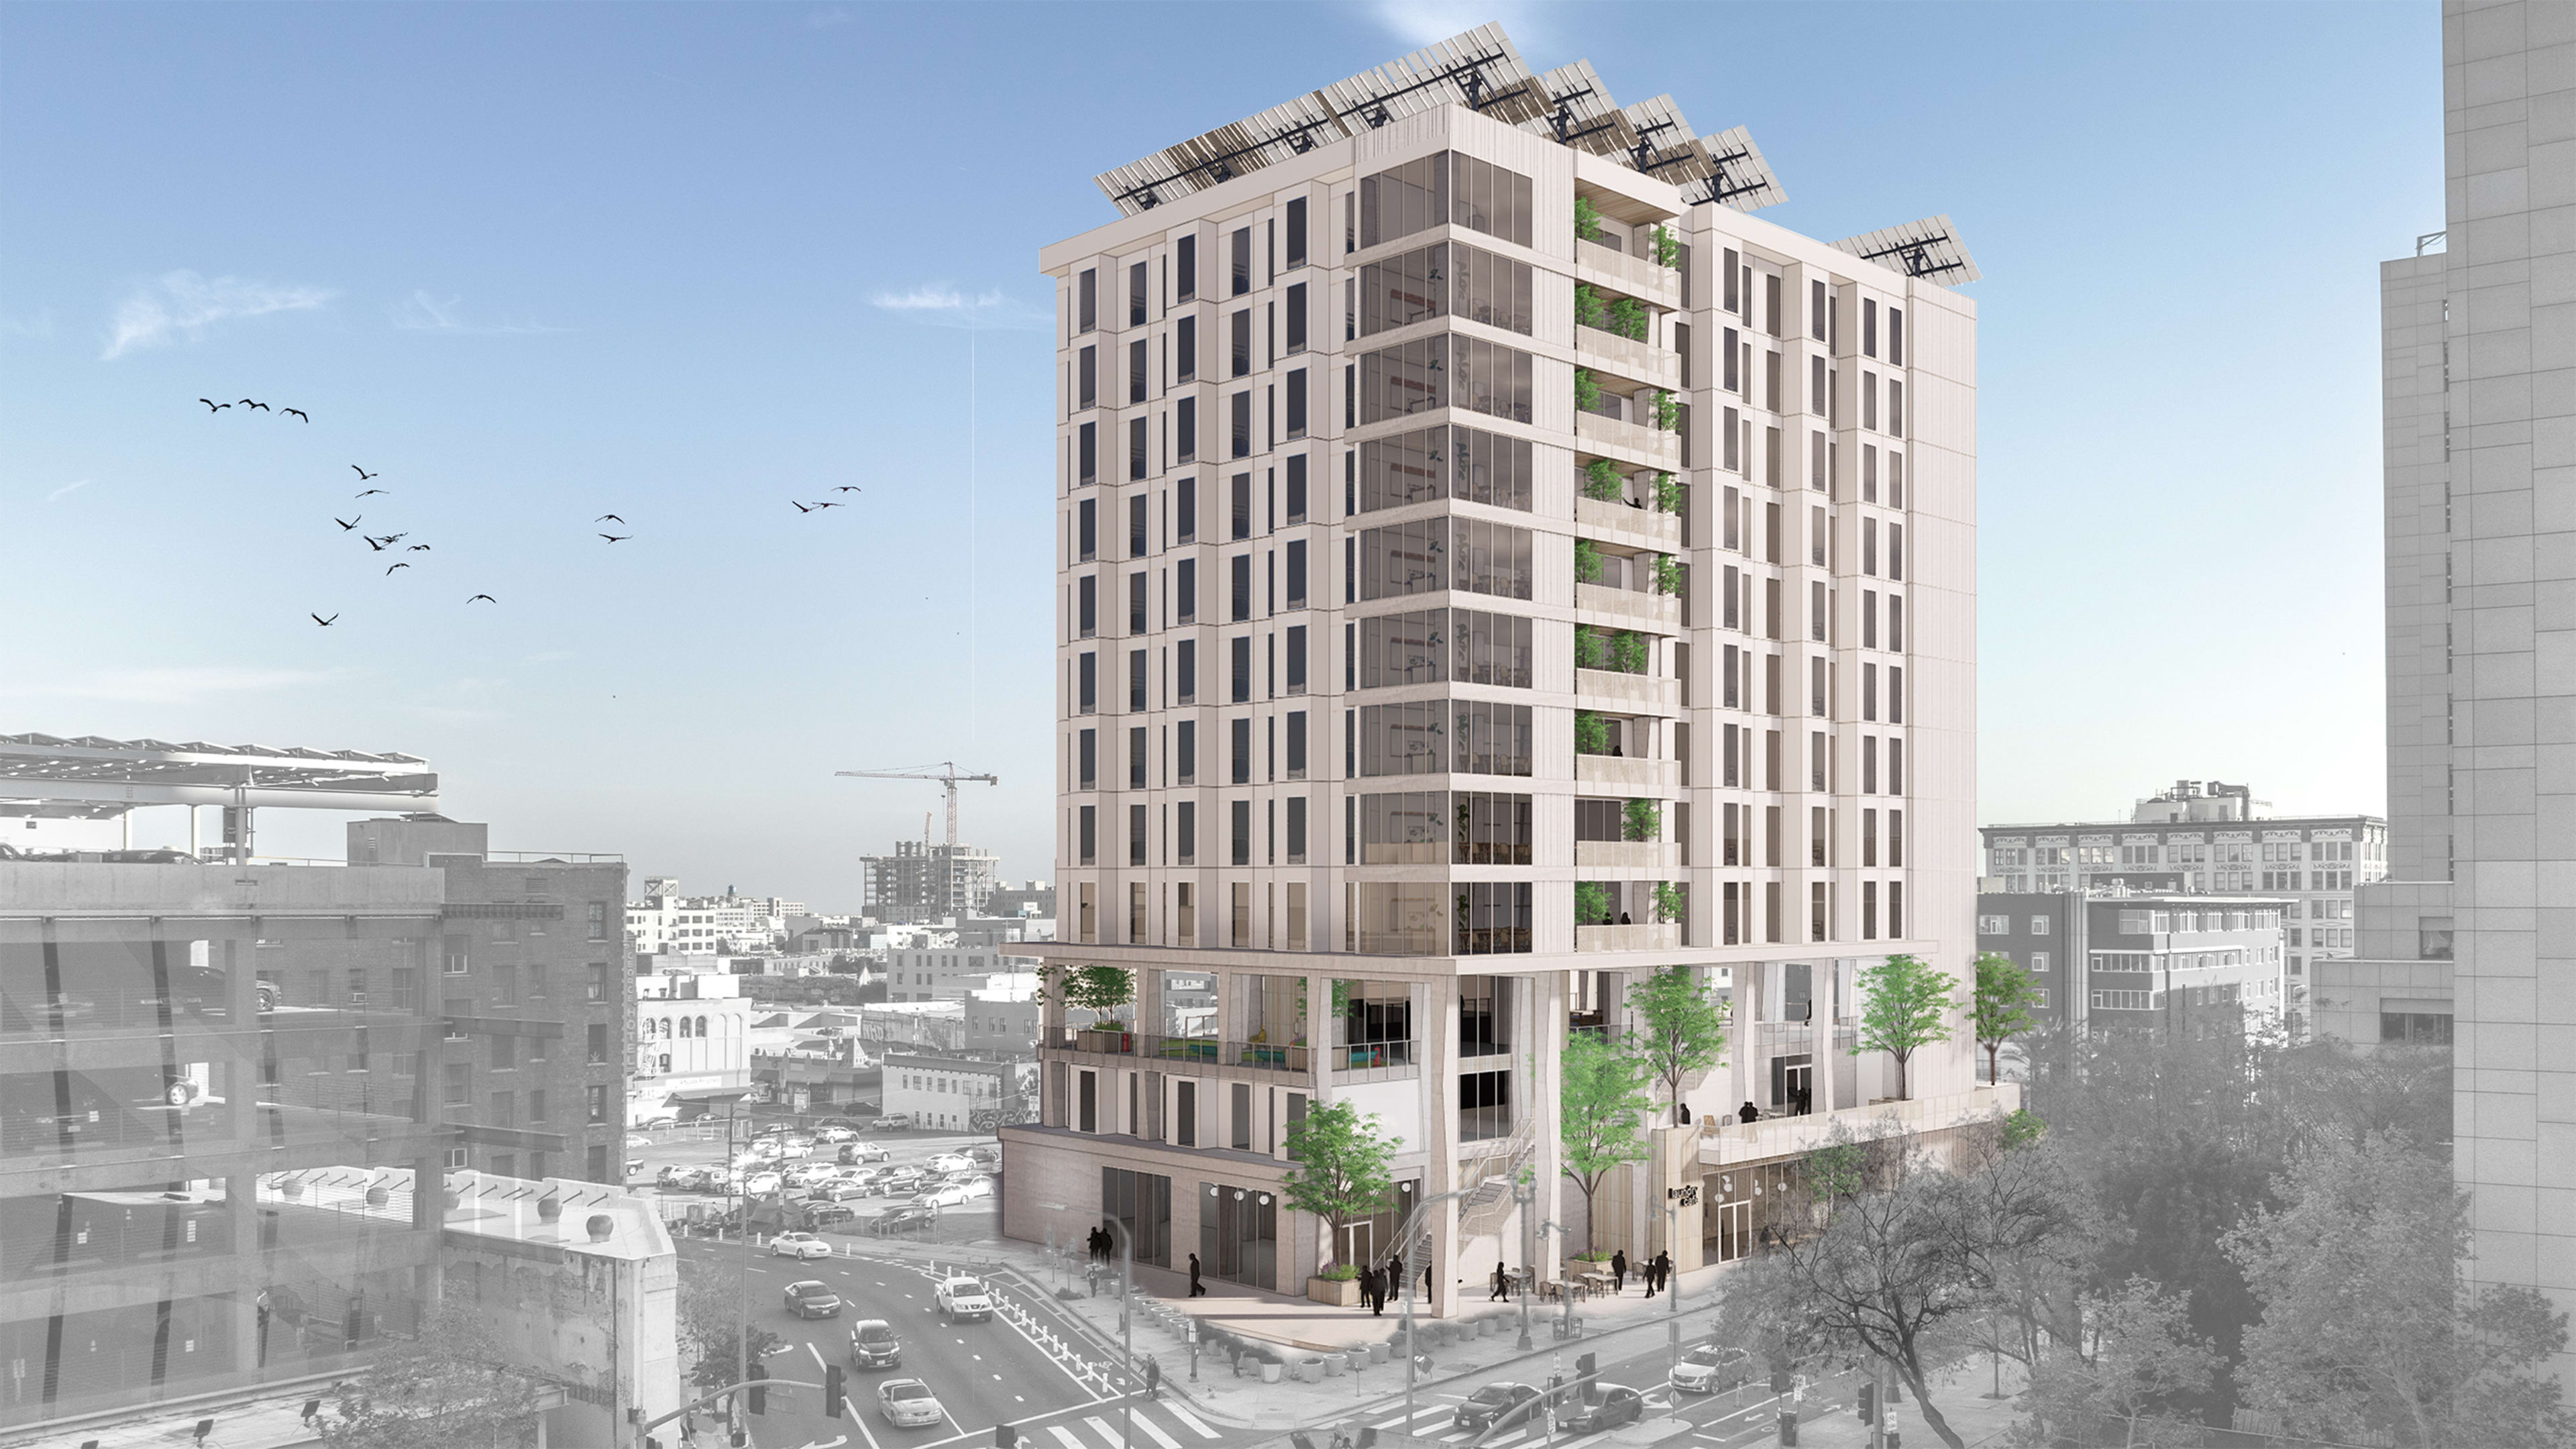 This radical proposal totally reimagines Skid Row housing